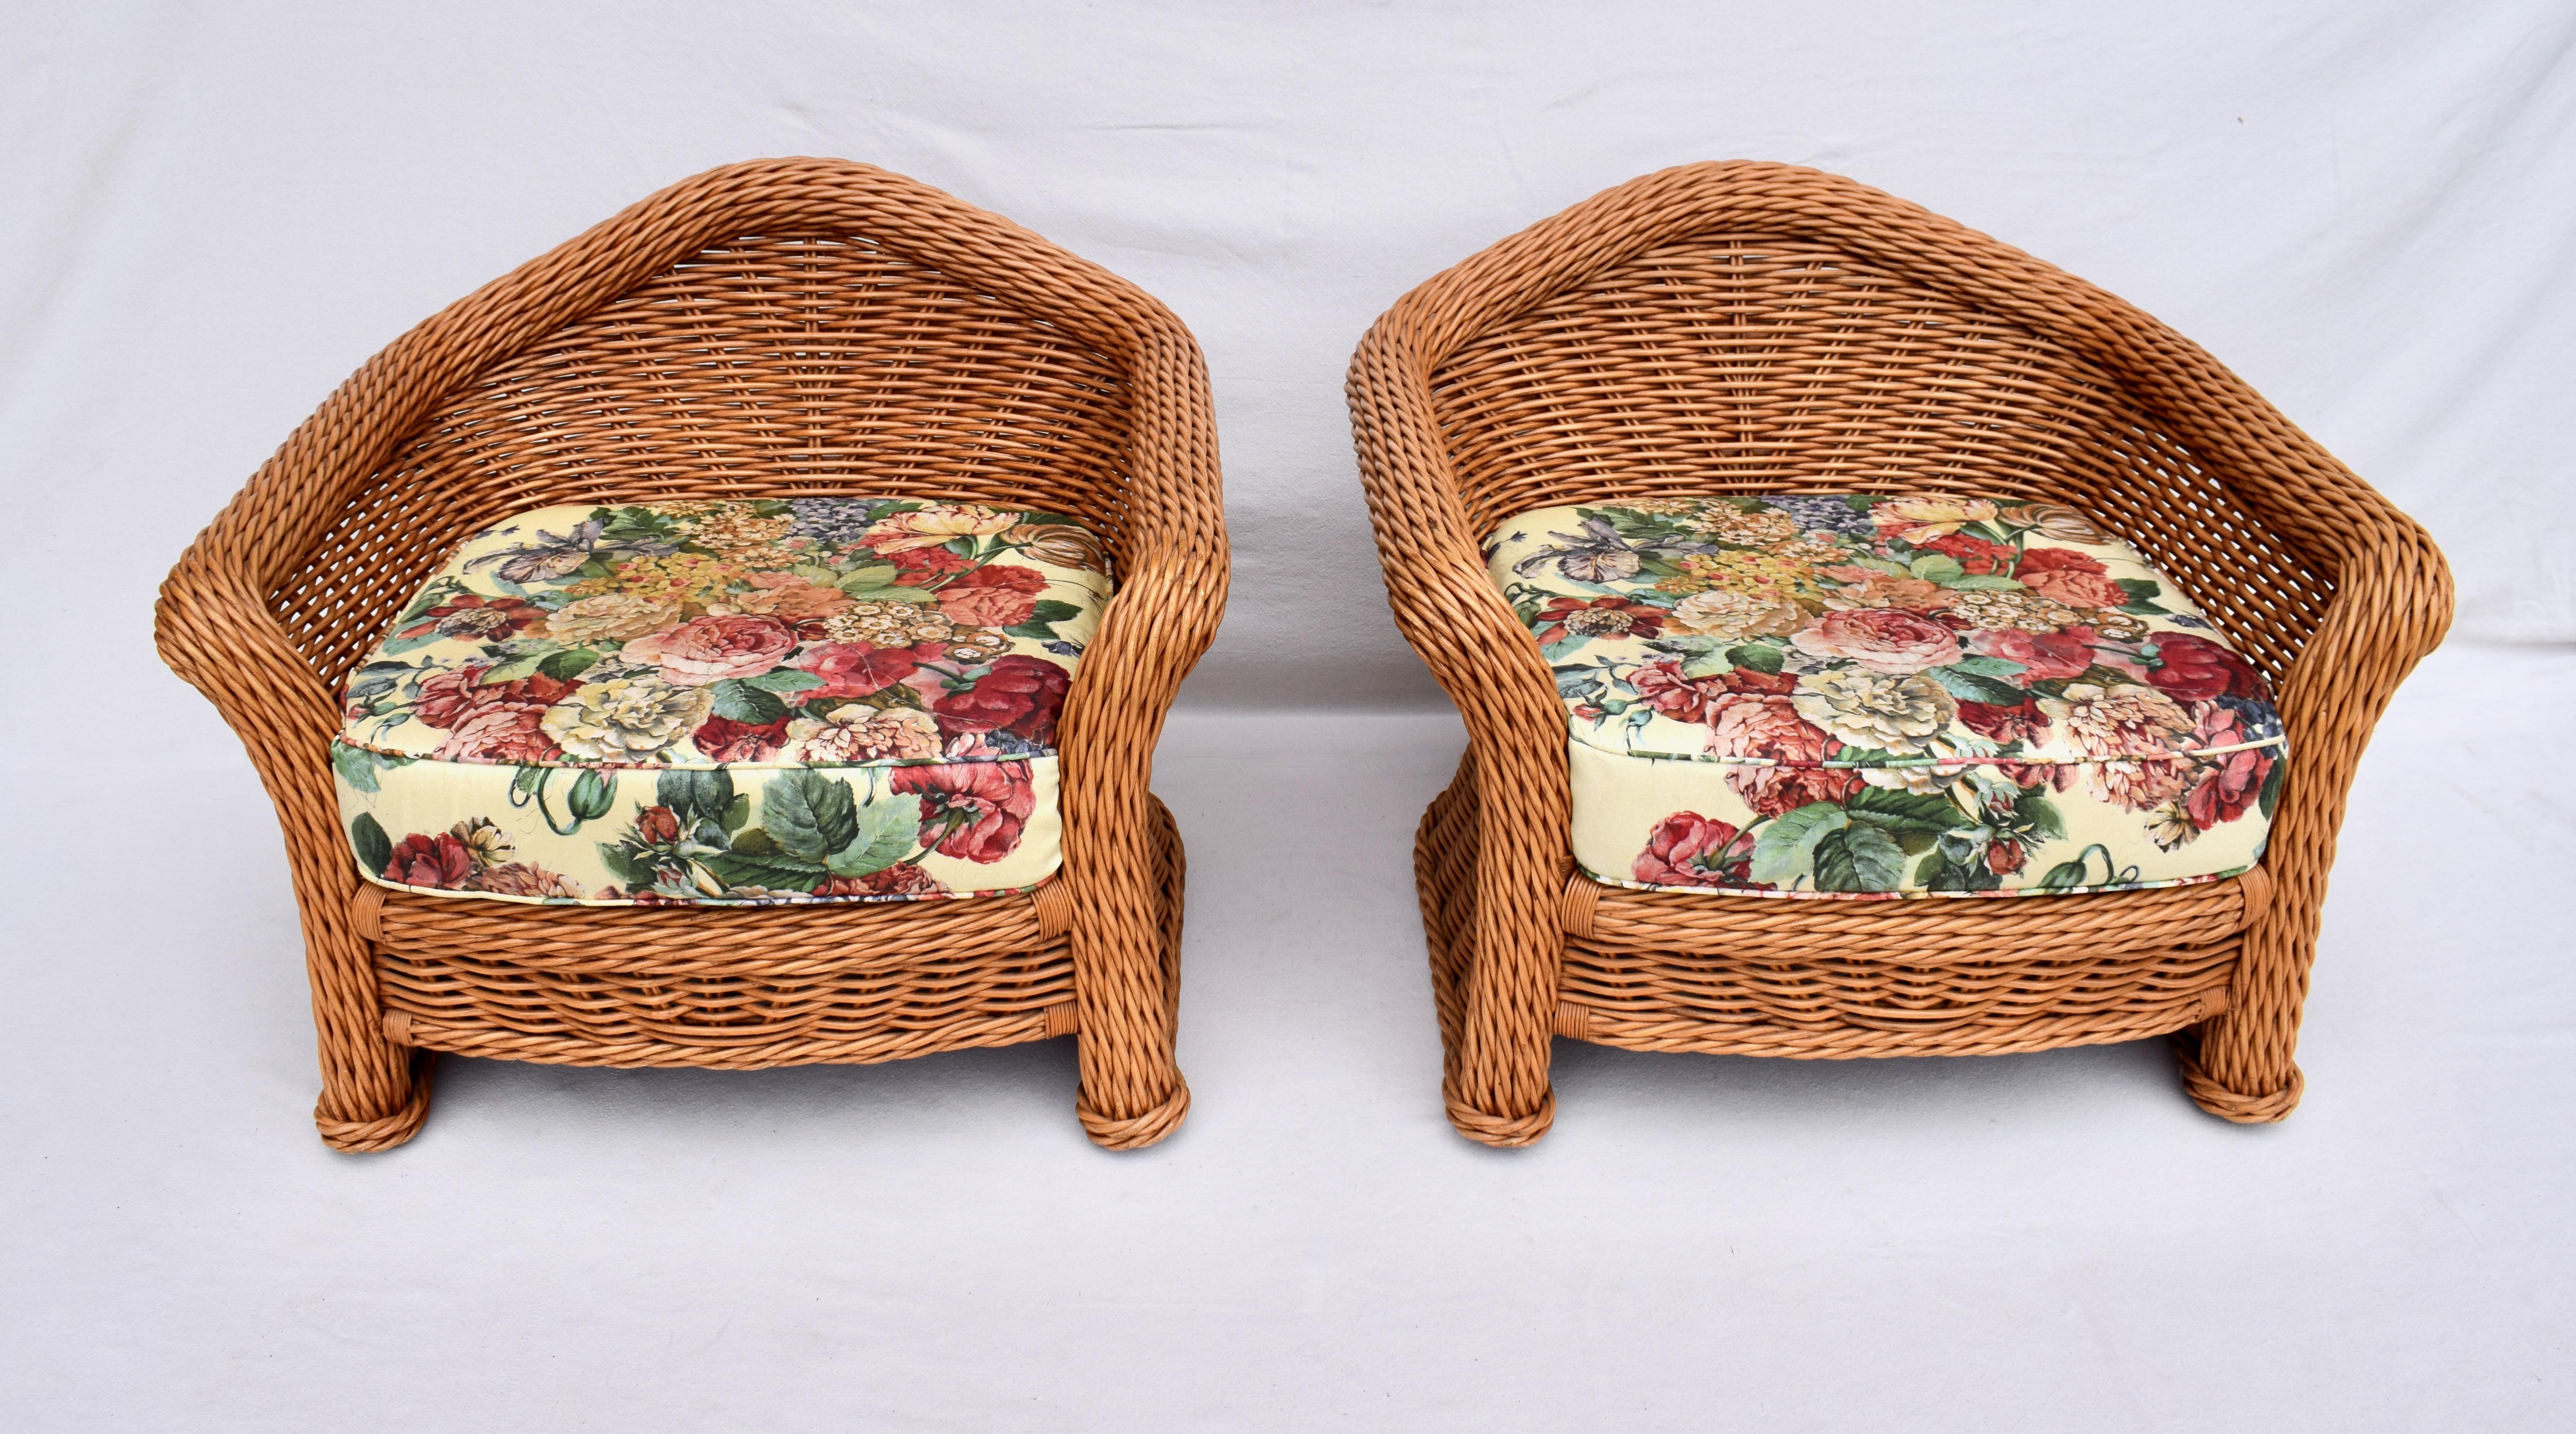 Upholstery Large Pair of Vintage Ficks Reed Rattan Arm Chairs Ottoman Set